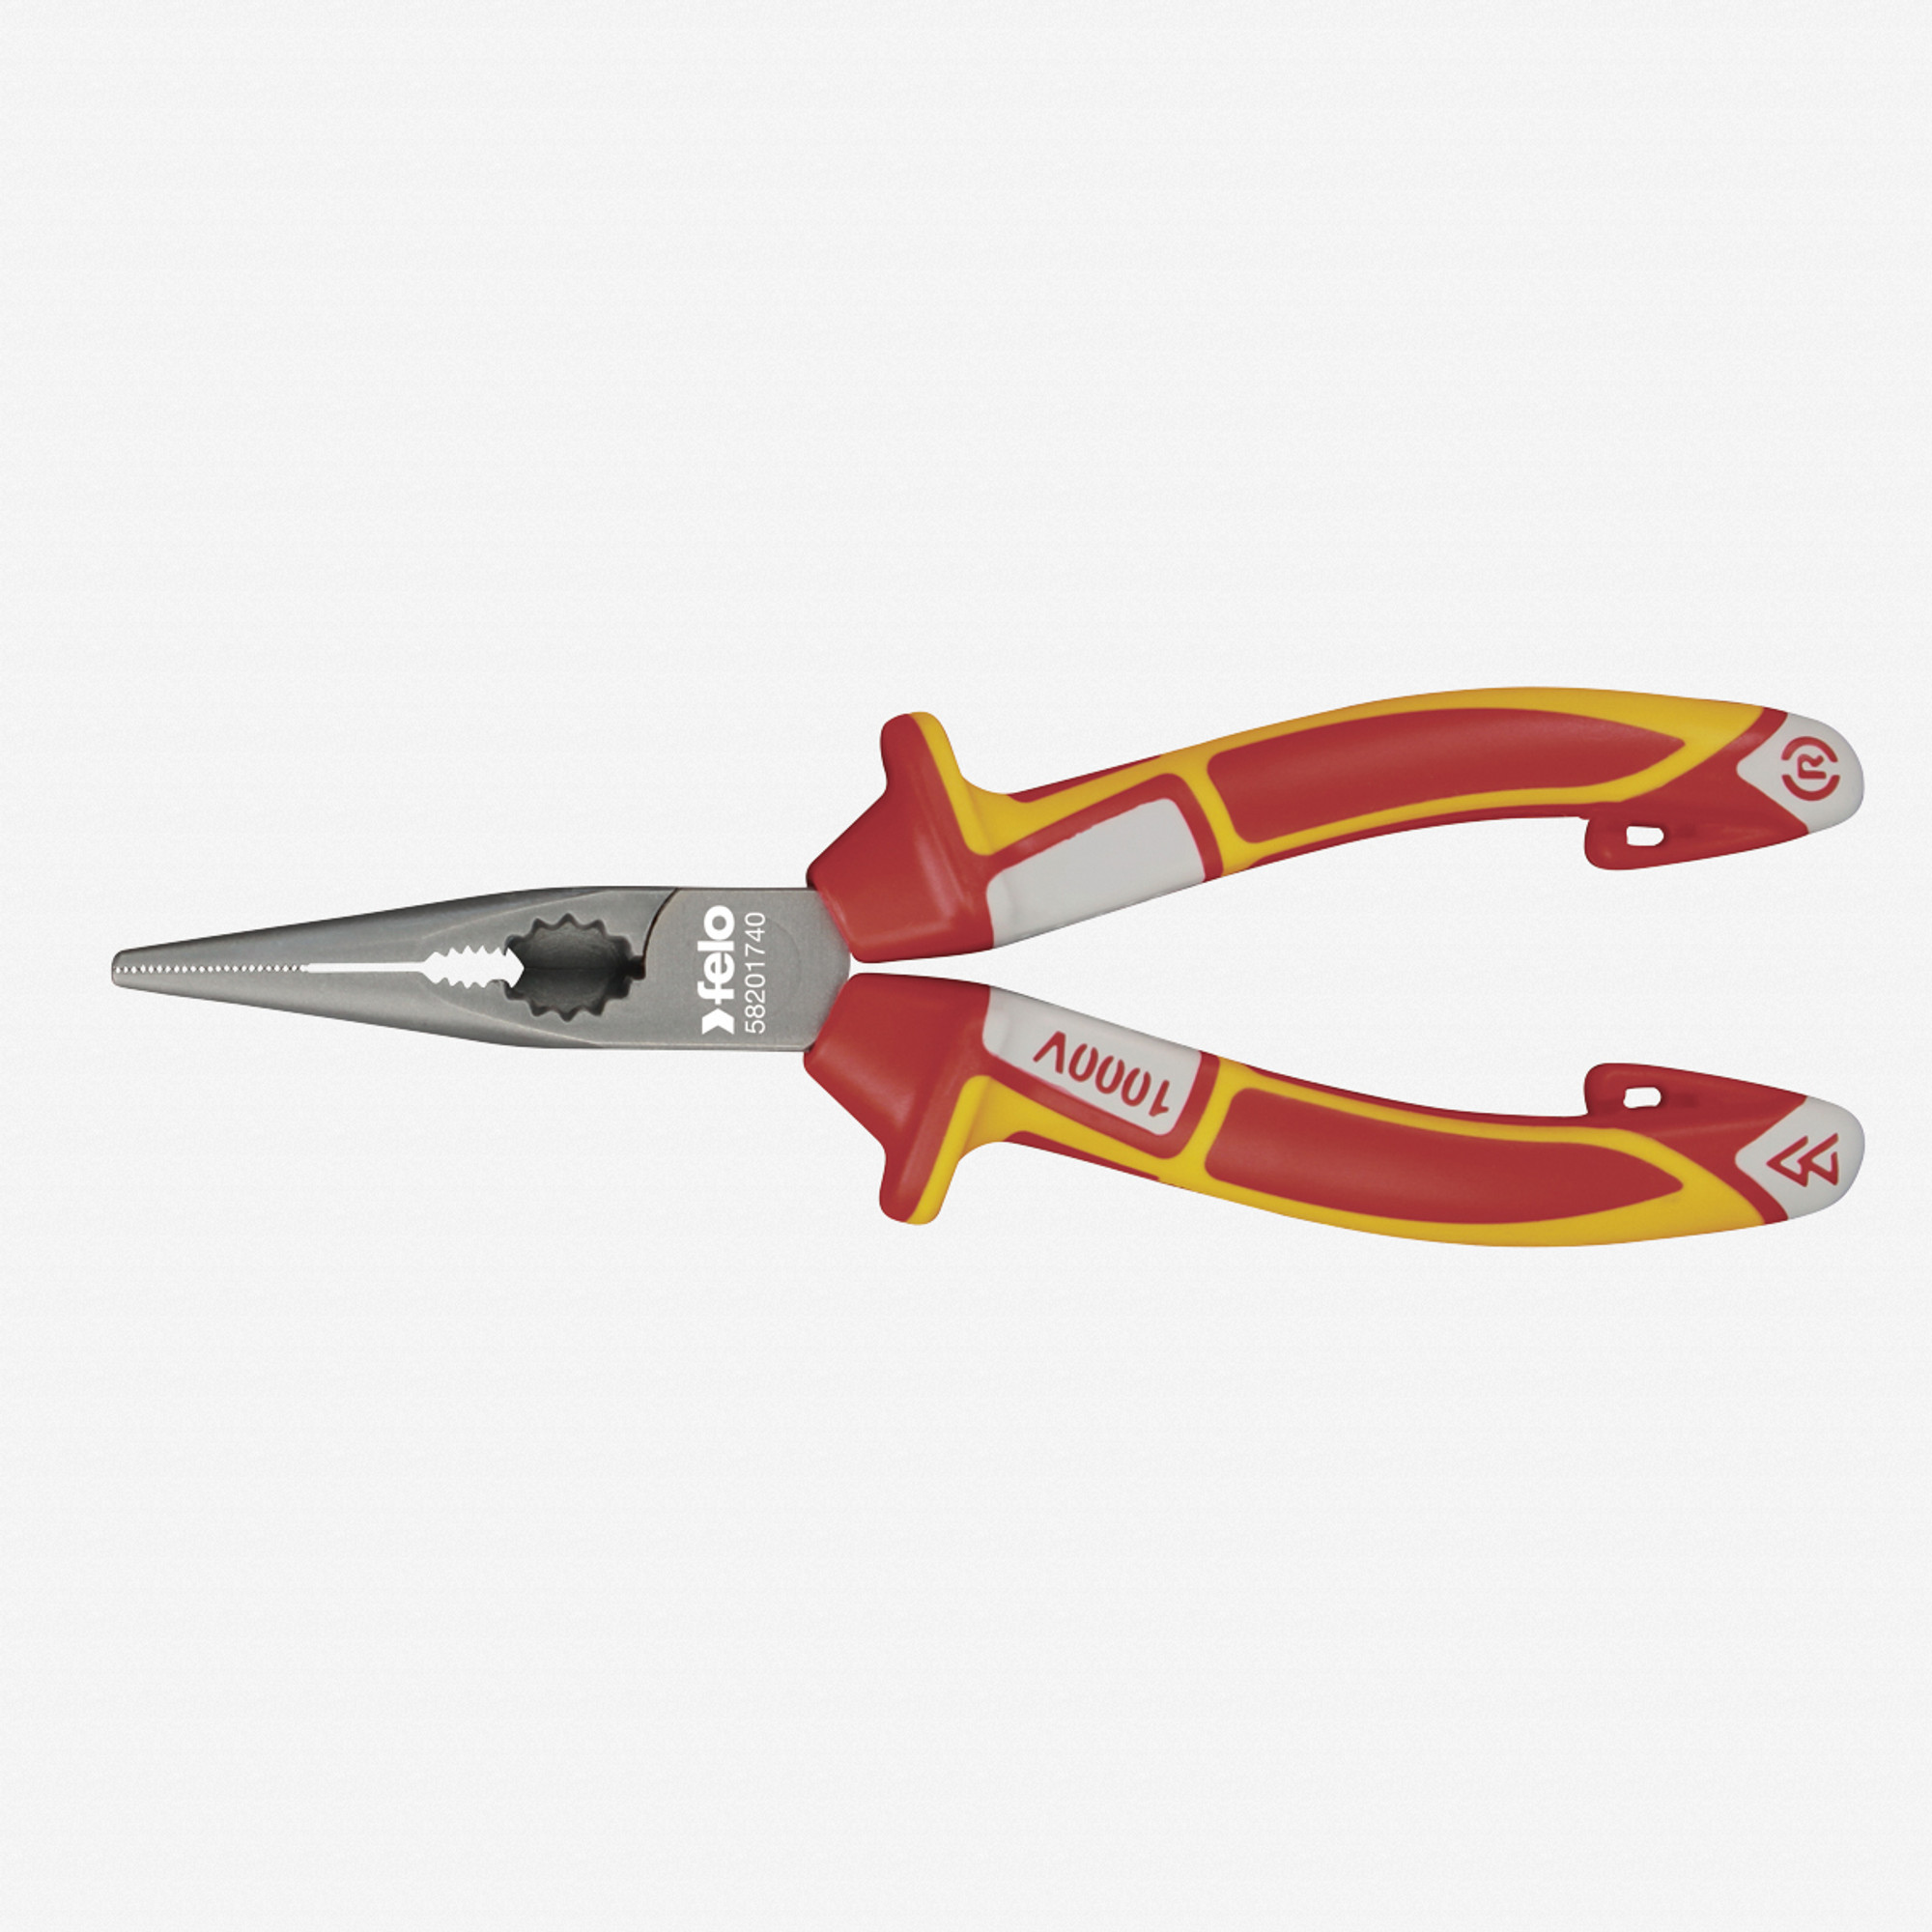 NWS 8 Chain Nose Pliers (Radio Pliers) - TitanFinish - SoftGripp, Tethered  Attachment